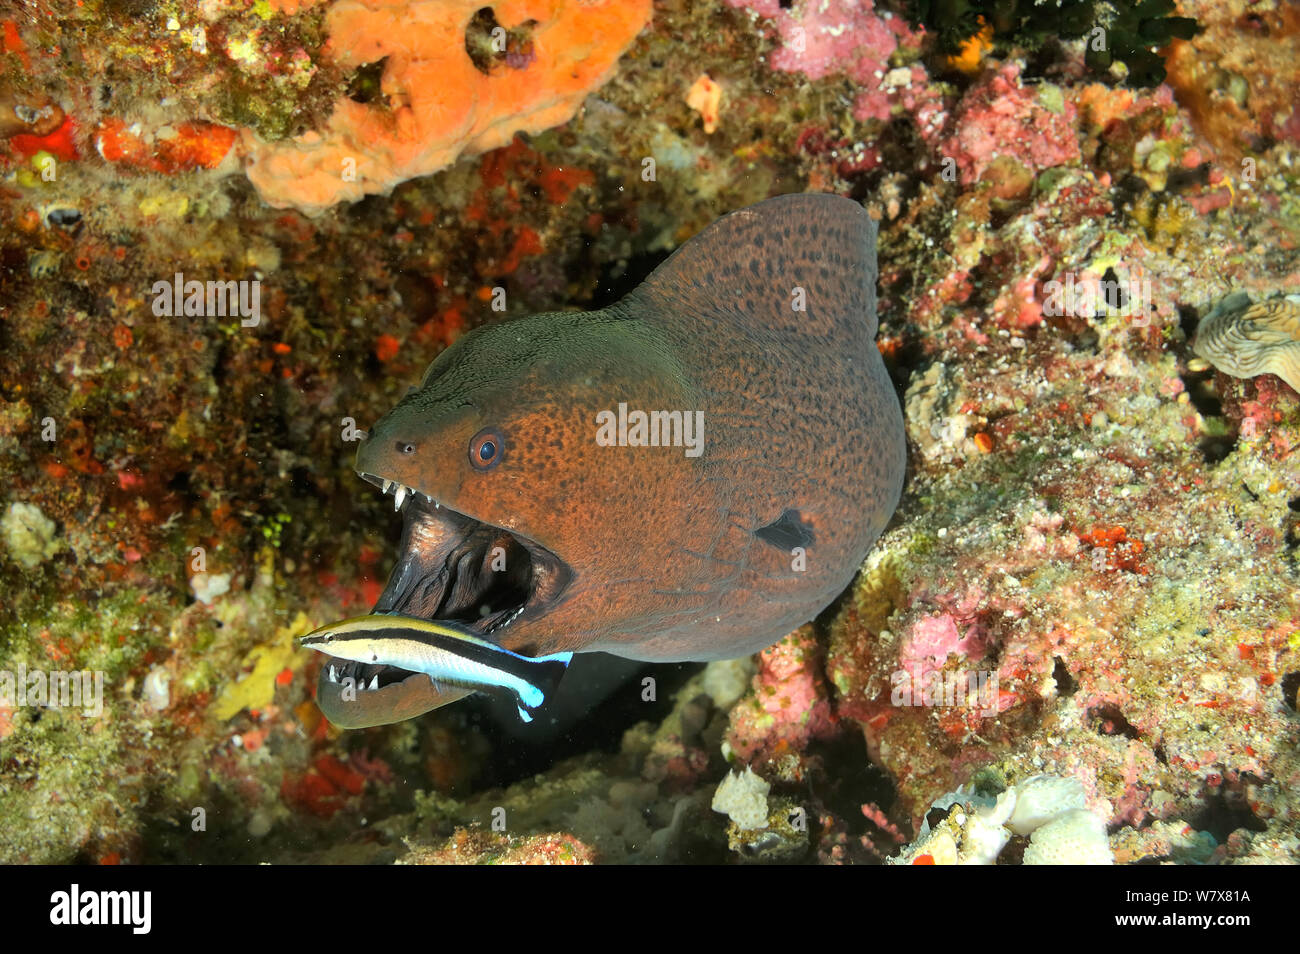 Bluestreak cleaner wrasses (Labroides dimidiatus) cleaning a Giant moray (Gymnothorax javanicus) Maldives. Indian Ocean. Stock Photo